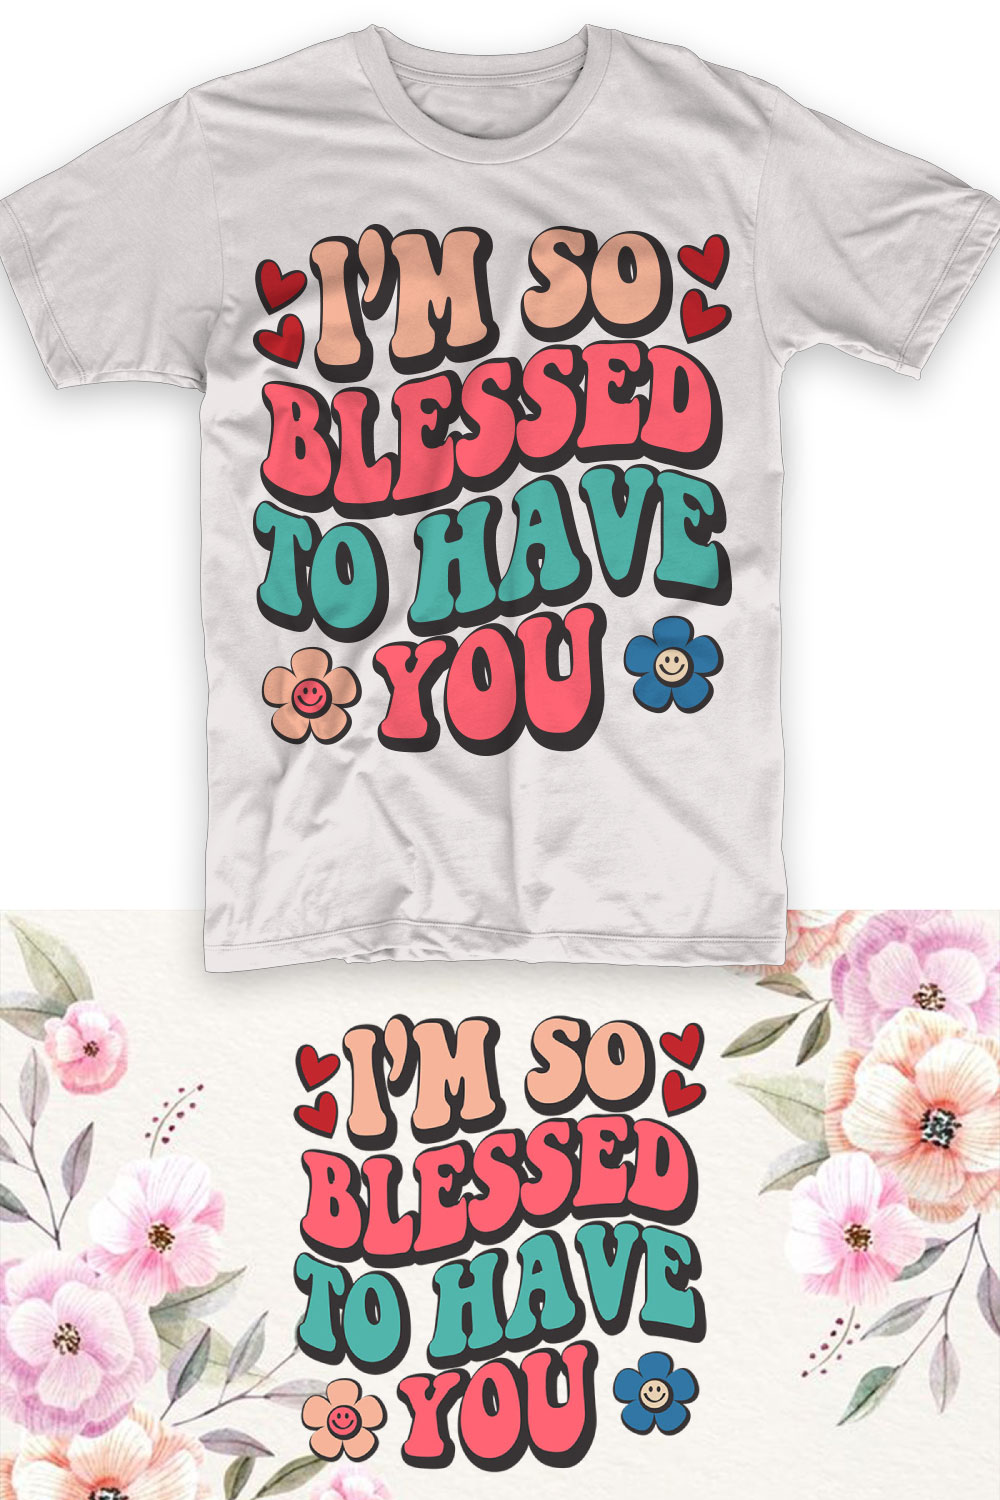 I’m So Blessed To Have You Valentine’s Day T-shirt Design pinterest image.